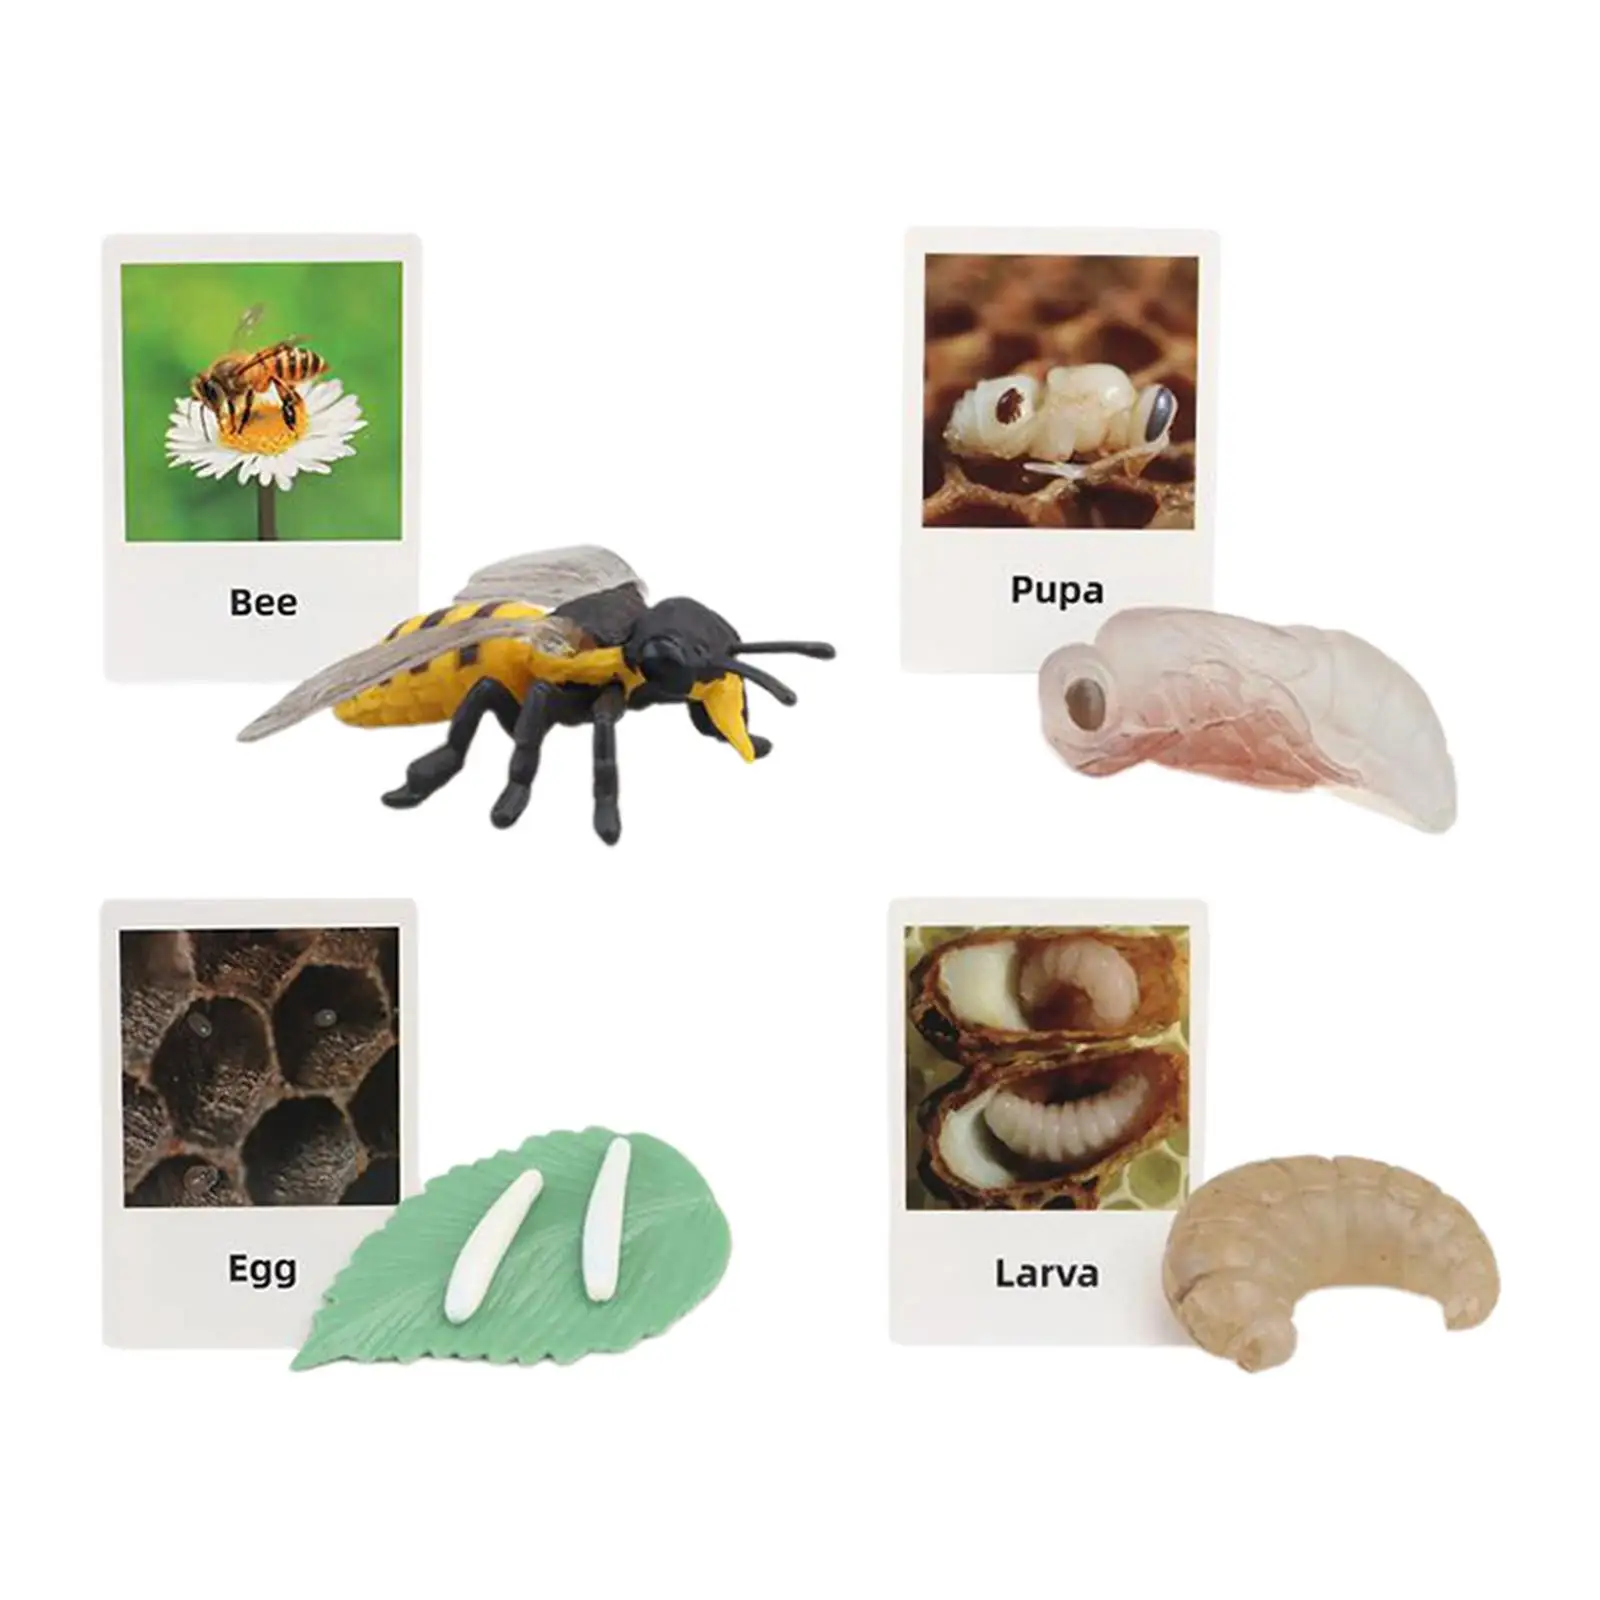 Life Cycle Toy ,Biology Science ,Educational Animal Growth Cycle Figures for Party Favors, Desktop Decoration, Preschool